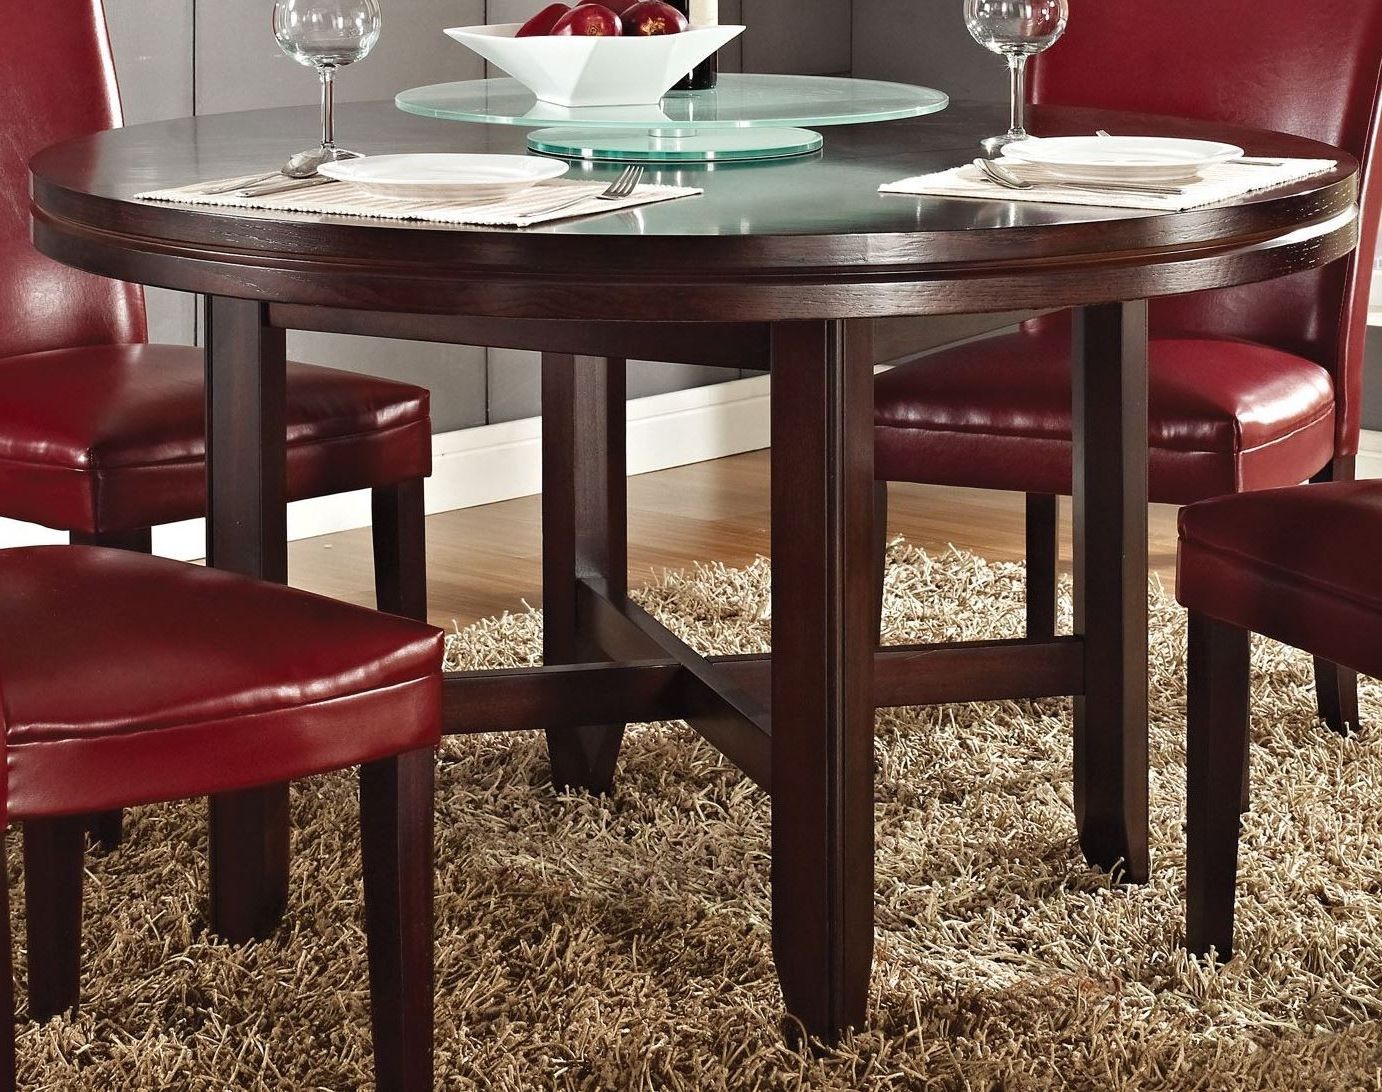 2019 Hartford Dark Oak 52" Round Dining Table From Steve Silver Throughout Dark Oak Wood Dining Tables (View 1 of 15)